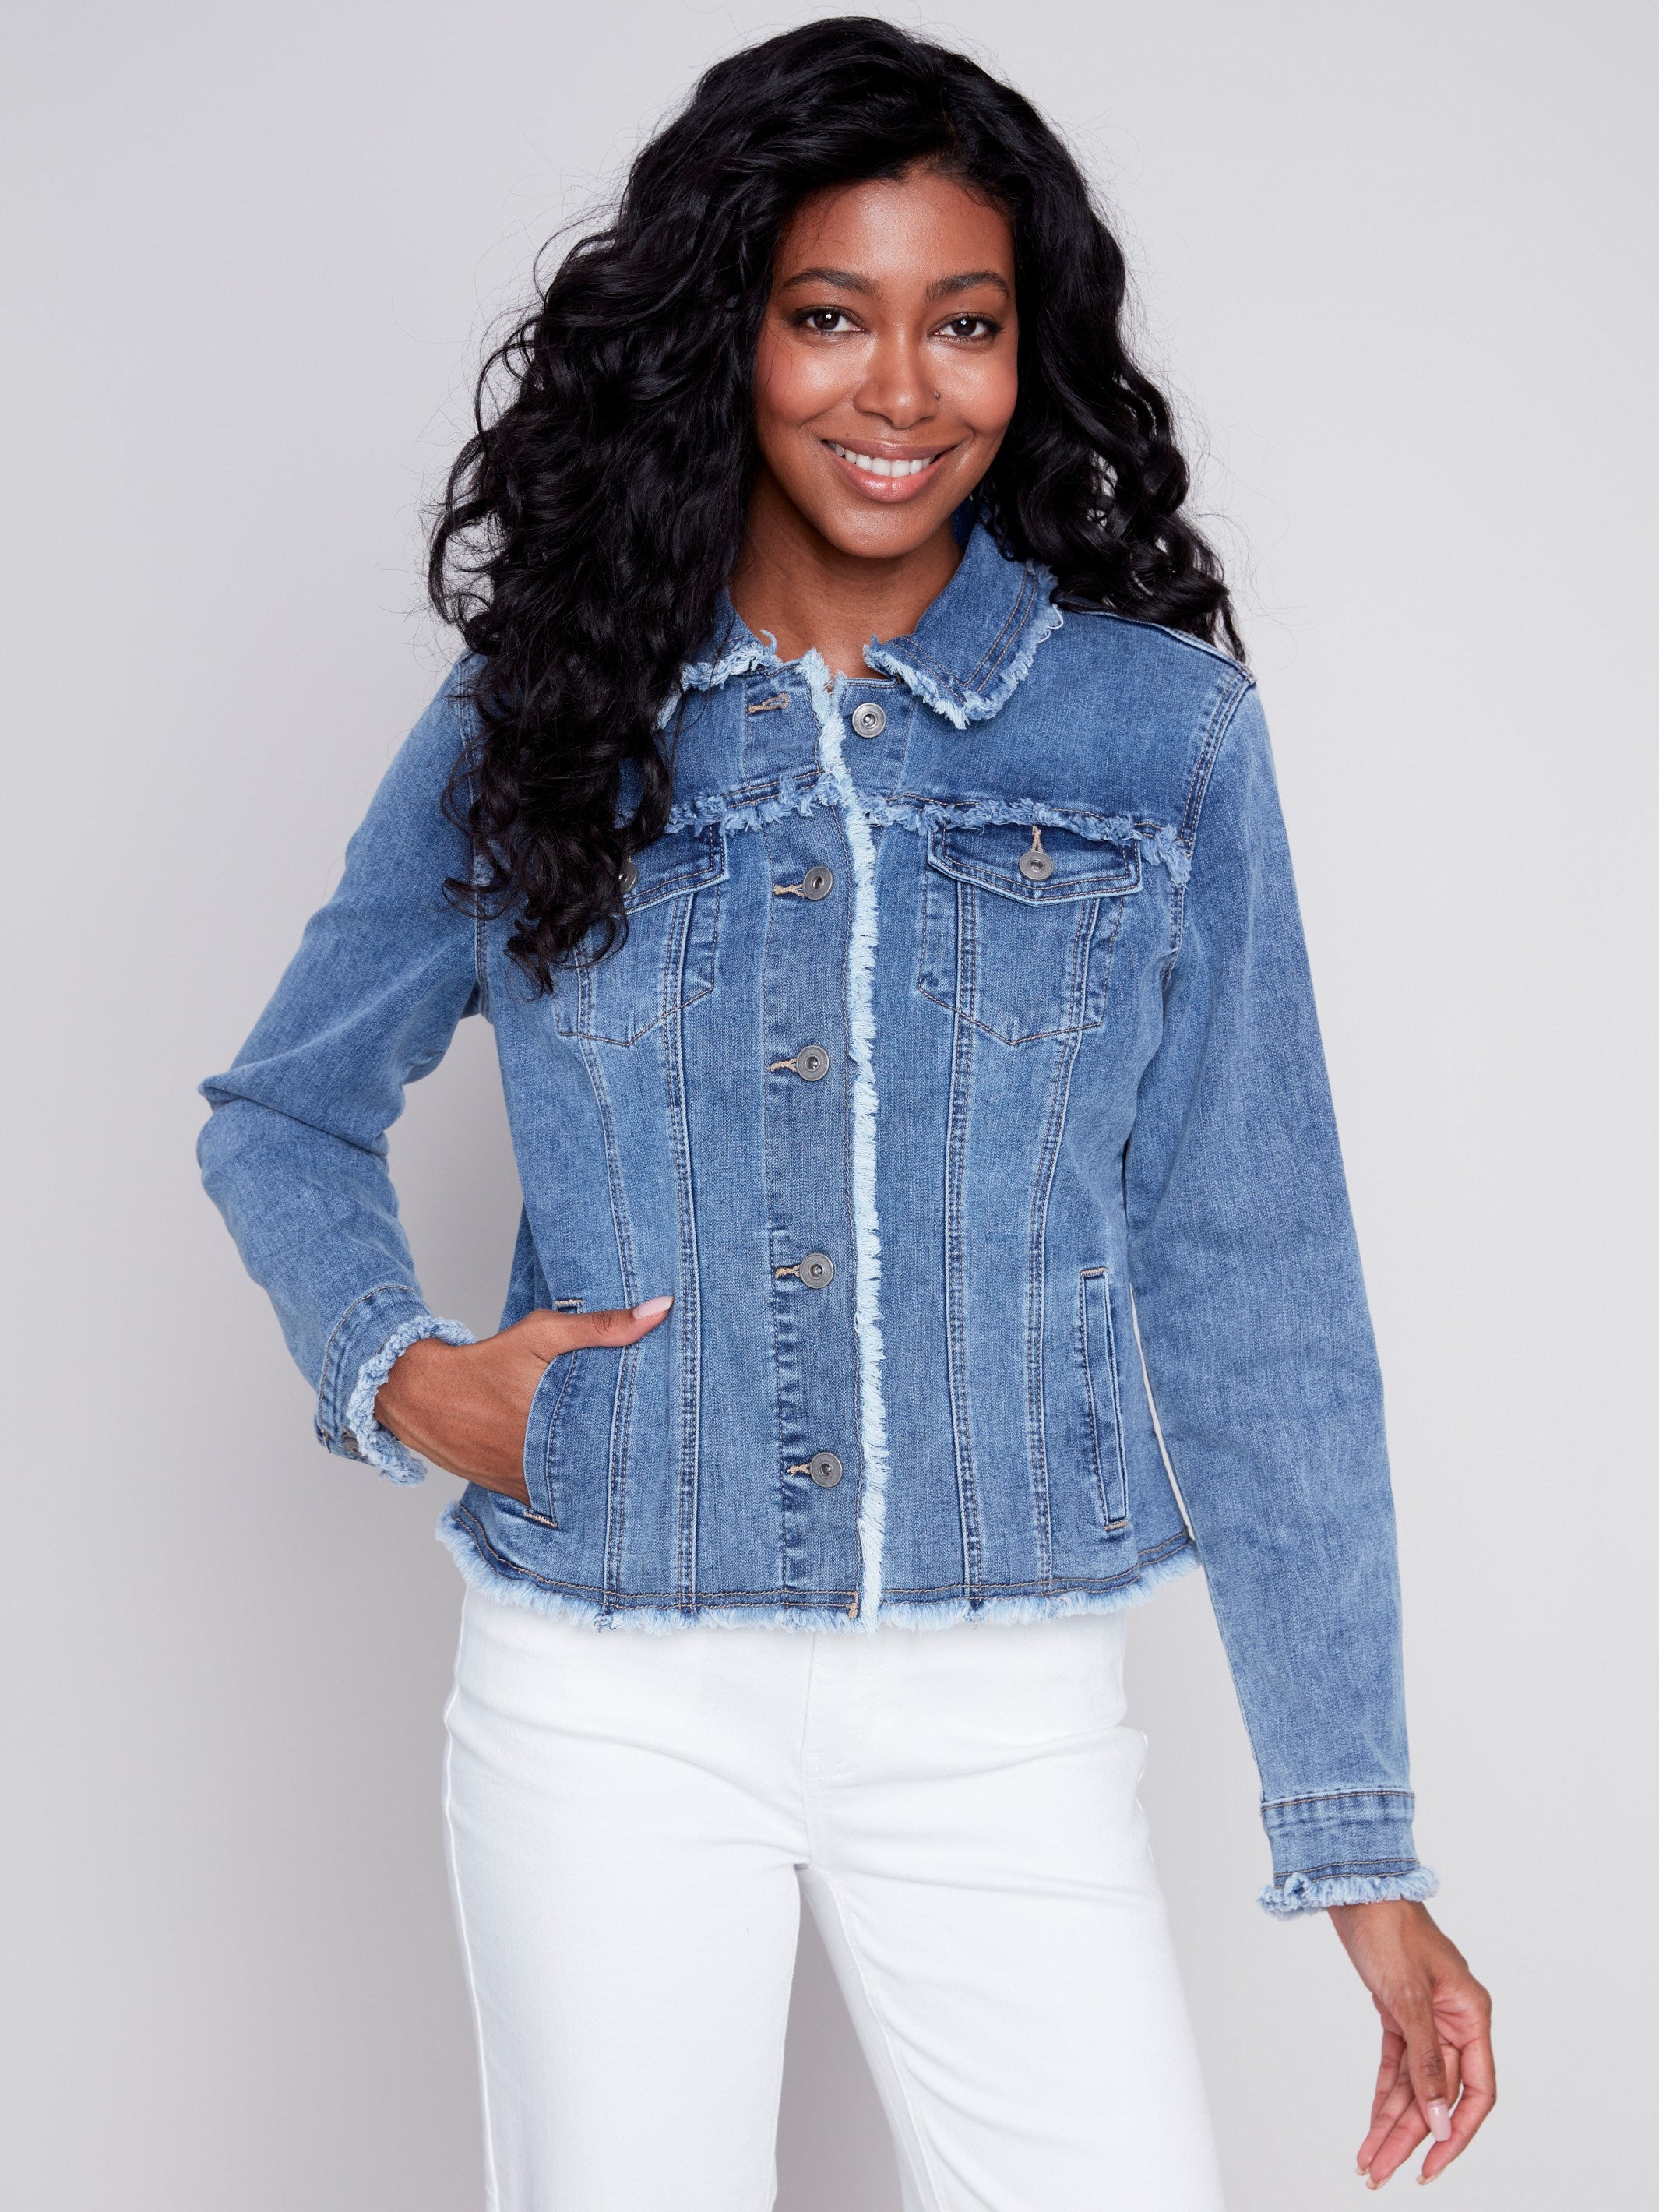 Jean Jacket with Frayed Edges - Medium Blue - Charlie B Collection Canada - Image 4